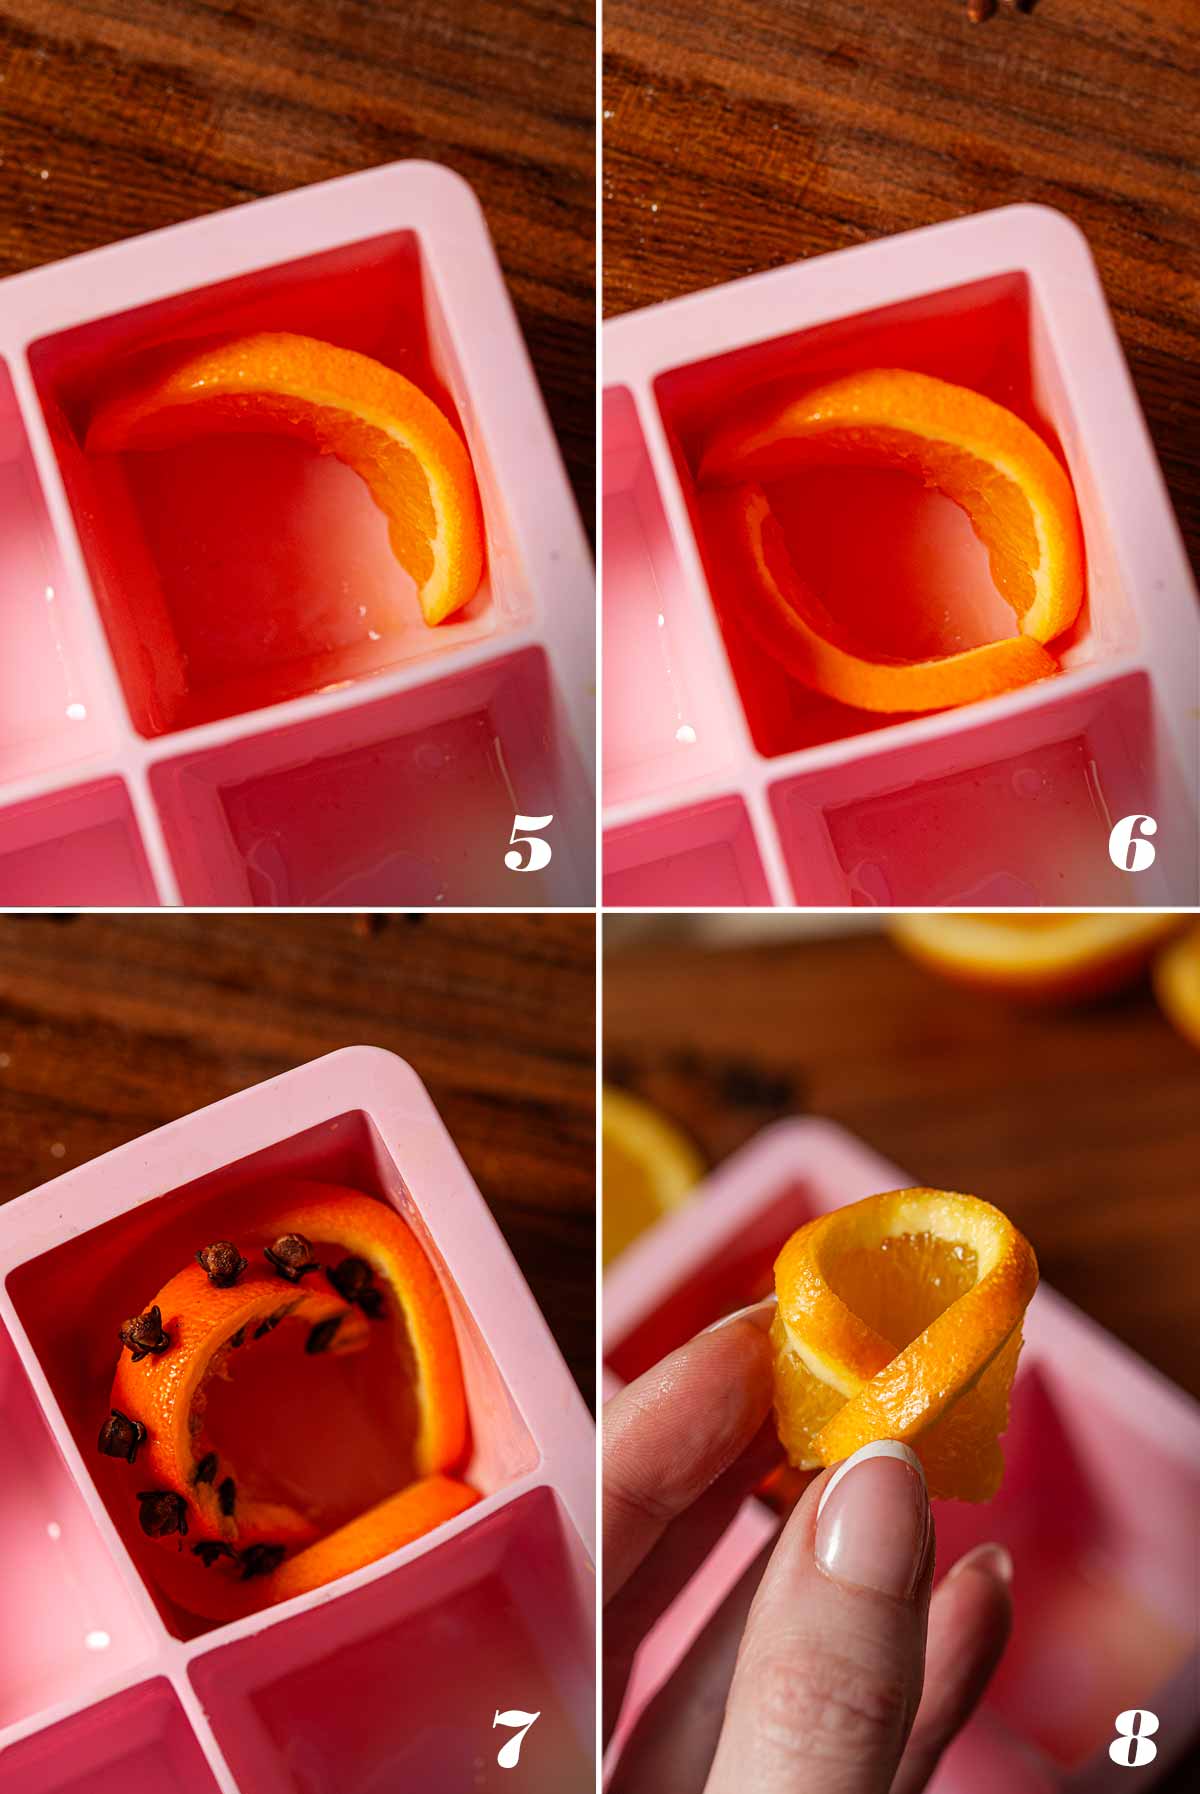 4 numbered images showing how to add orange slices to an ice tray.